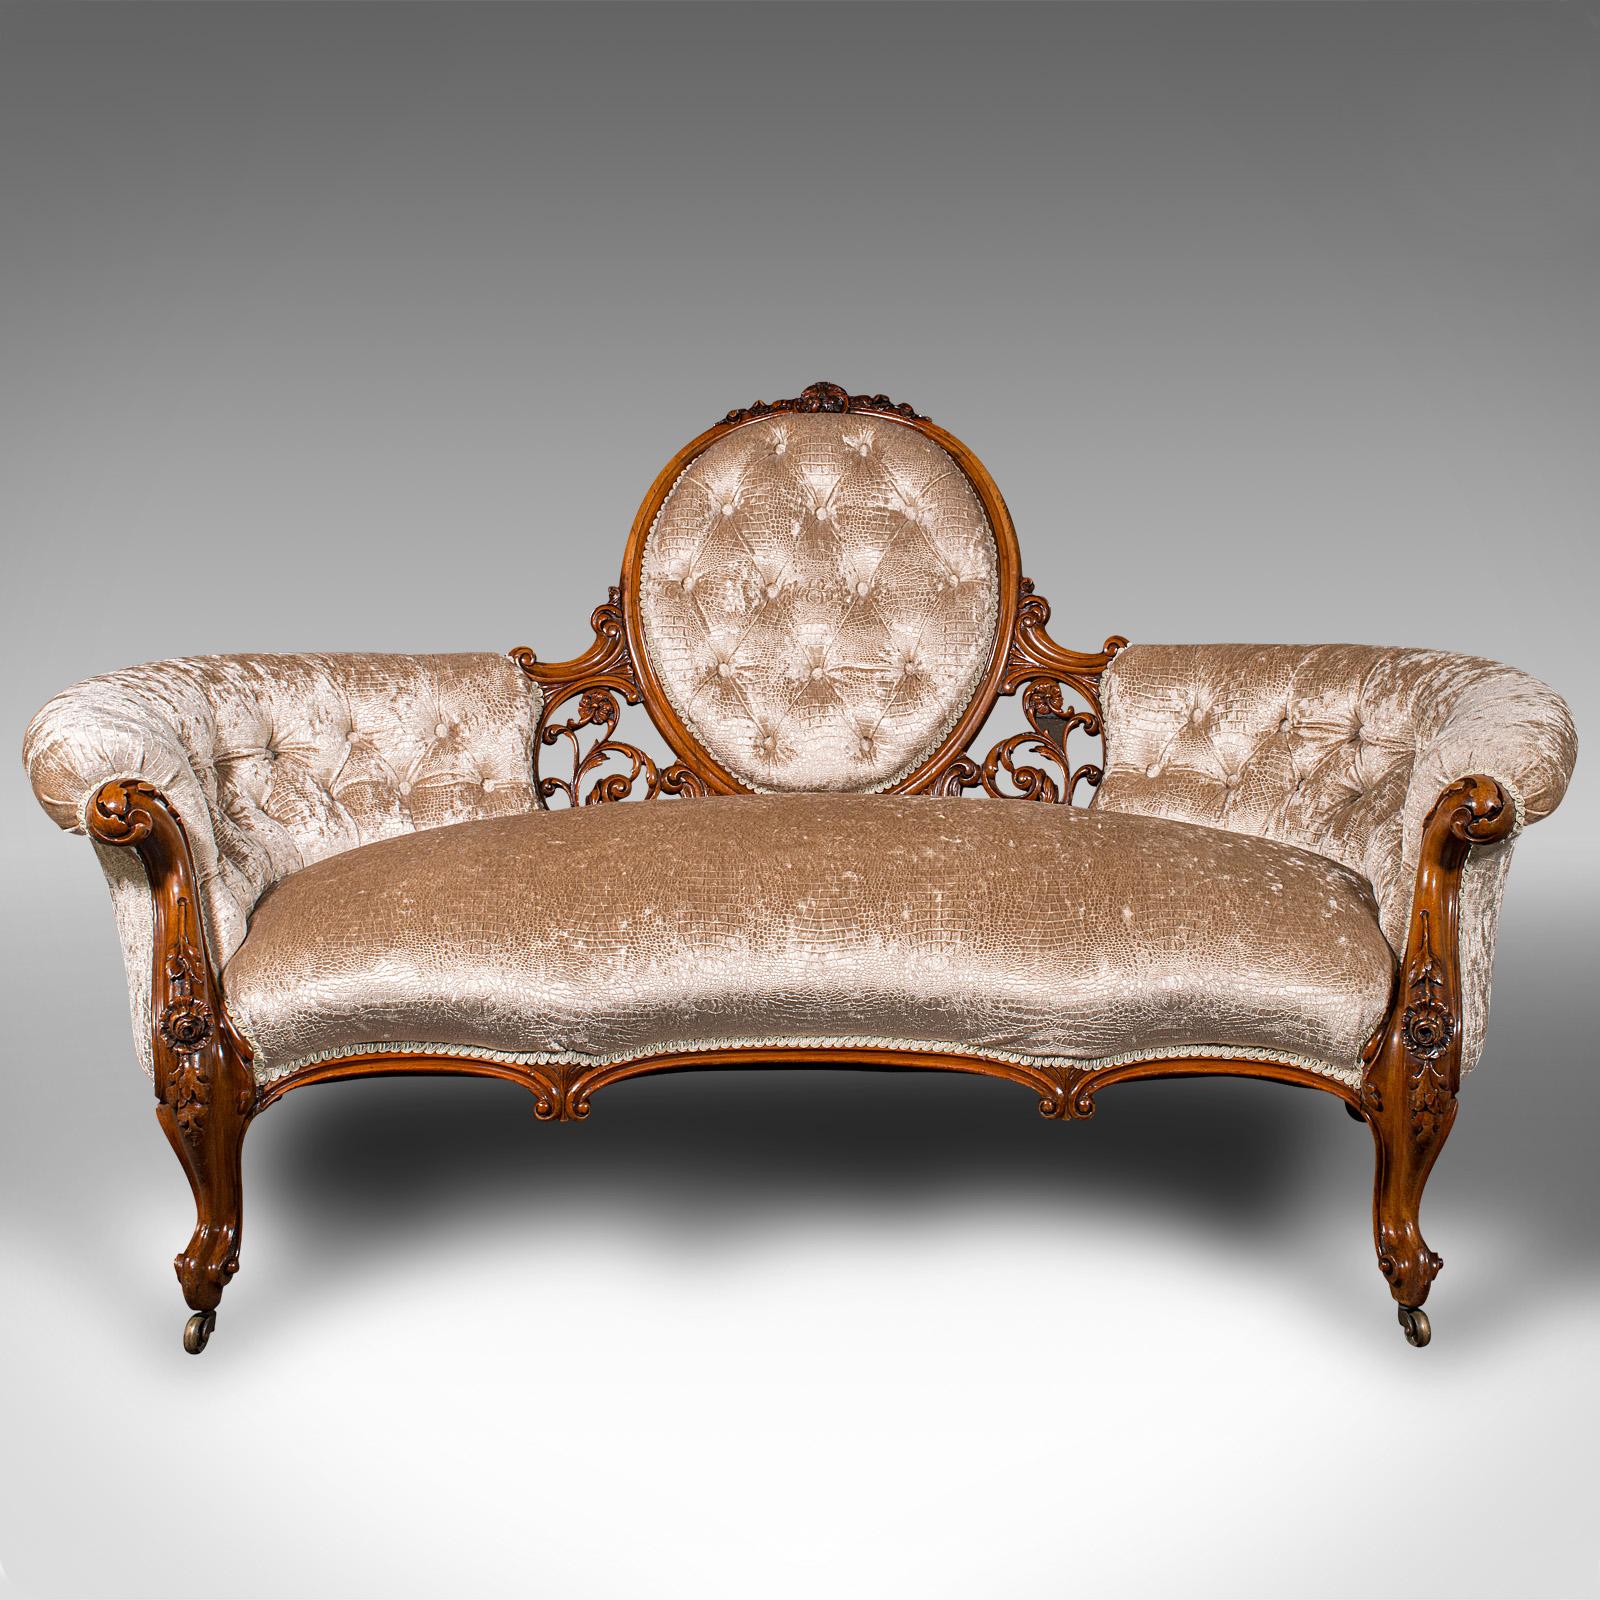 This is an antique carved spoon back settee. An English, walnut and Chenille upholstered showpiece sofa, dating to the early Victorian period, circa 1840.

Alluring, inviting and exquisite - a sofa of exceptional visual appeal
Displays a desirable